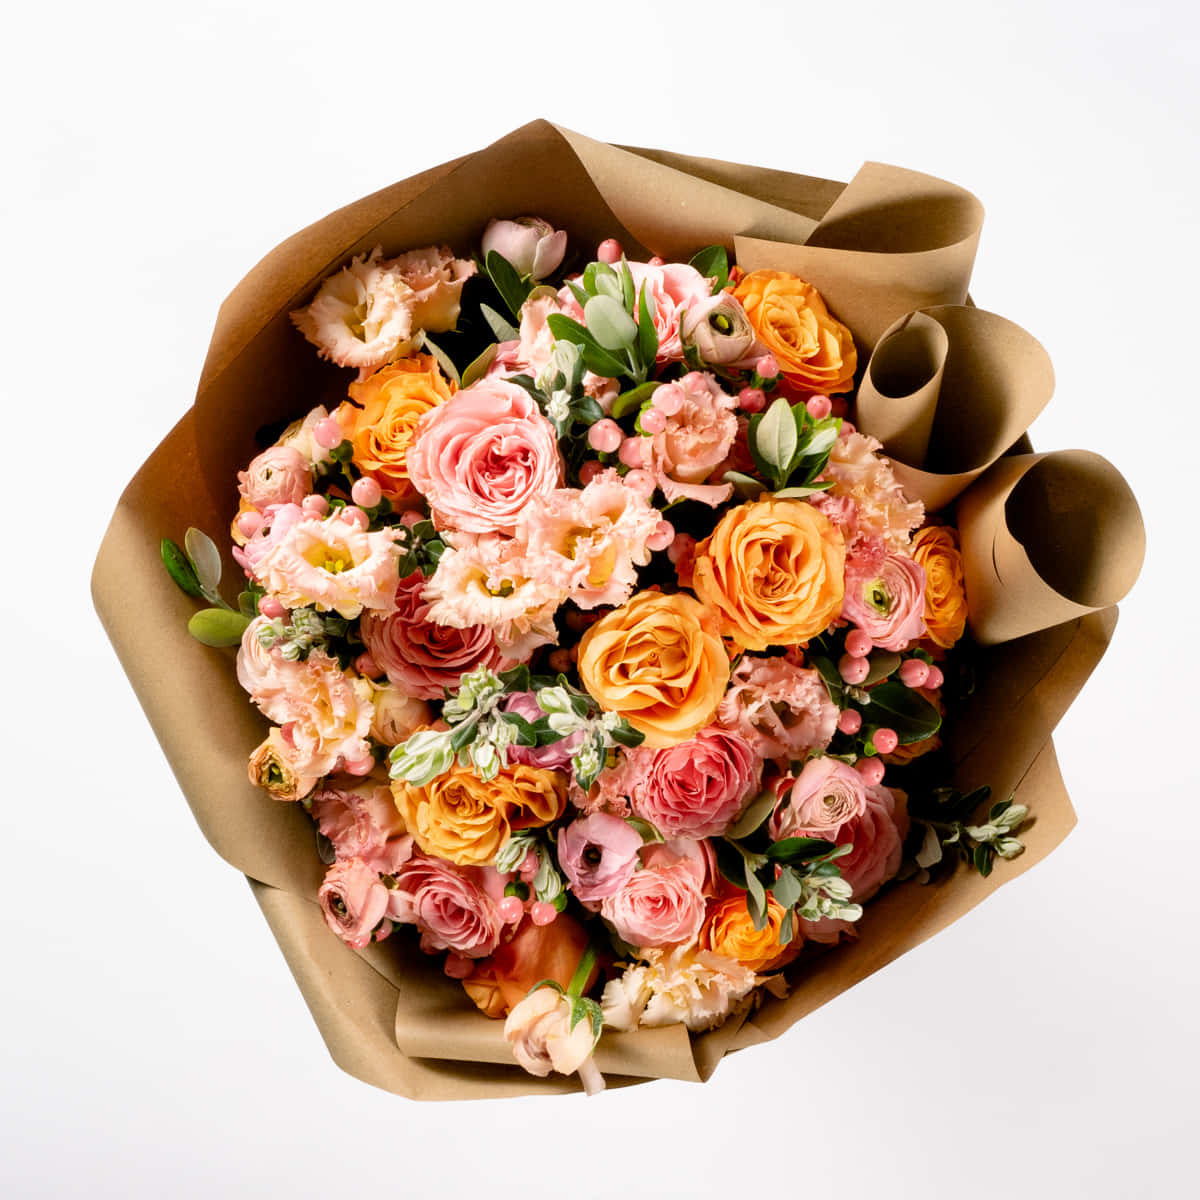 Top View Of Bouquet Of Flowers Picture